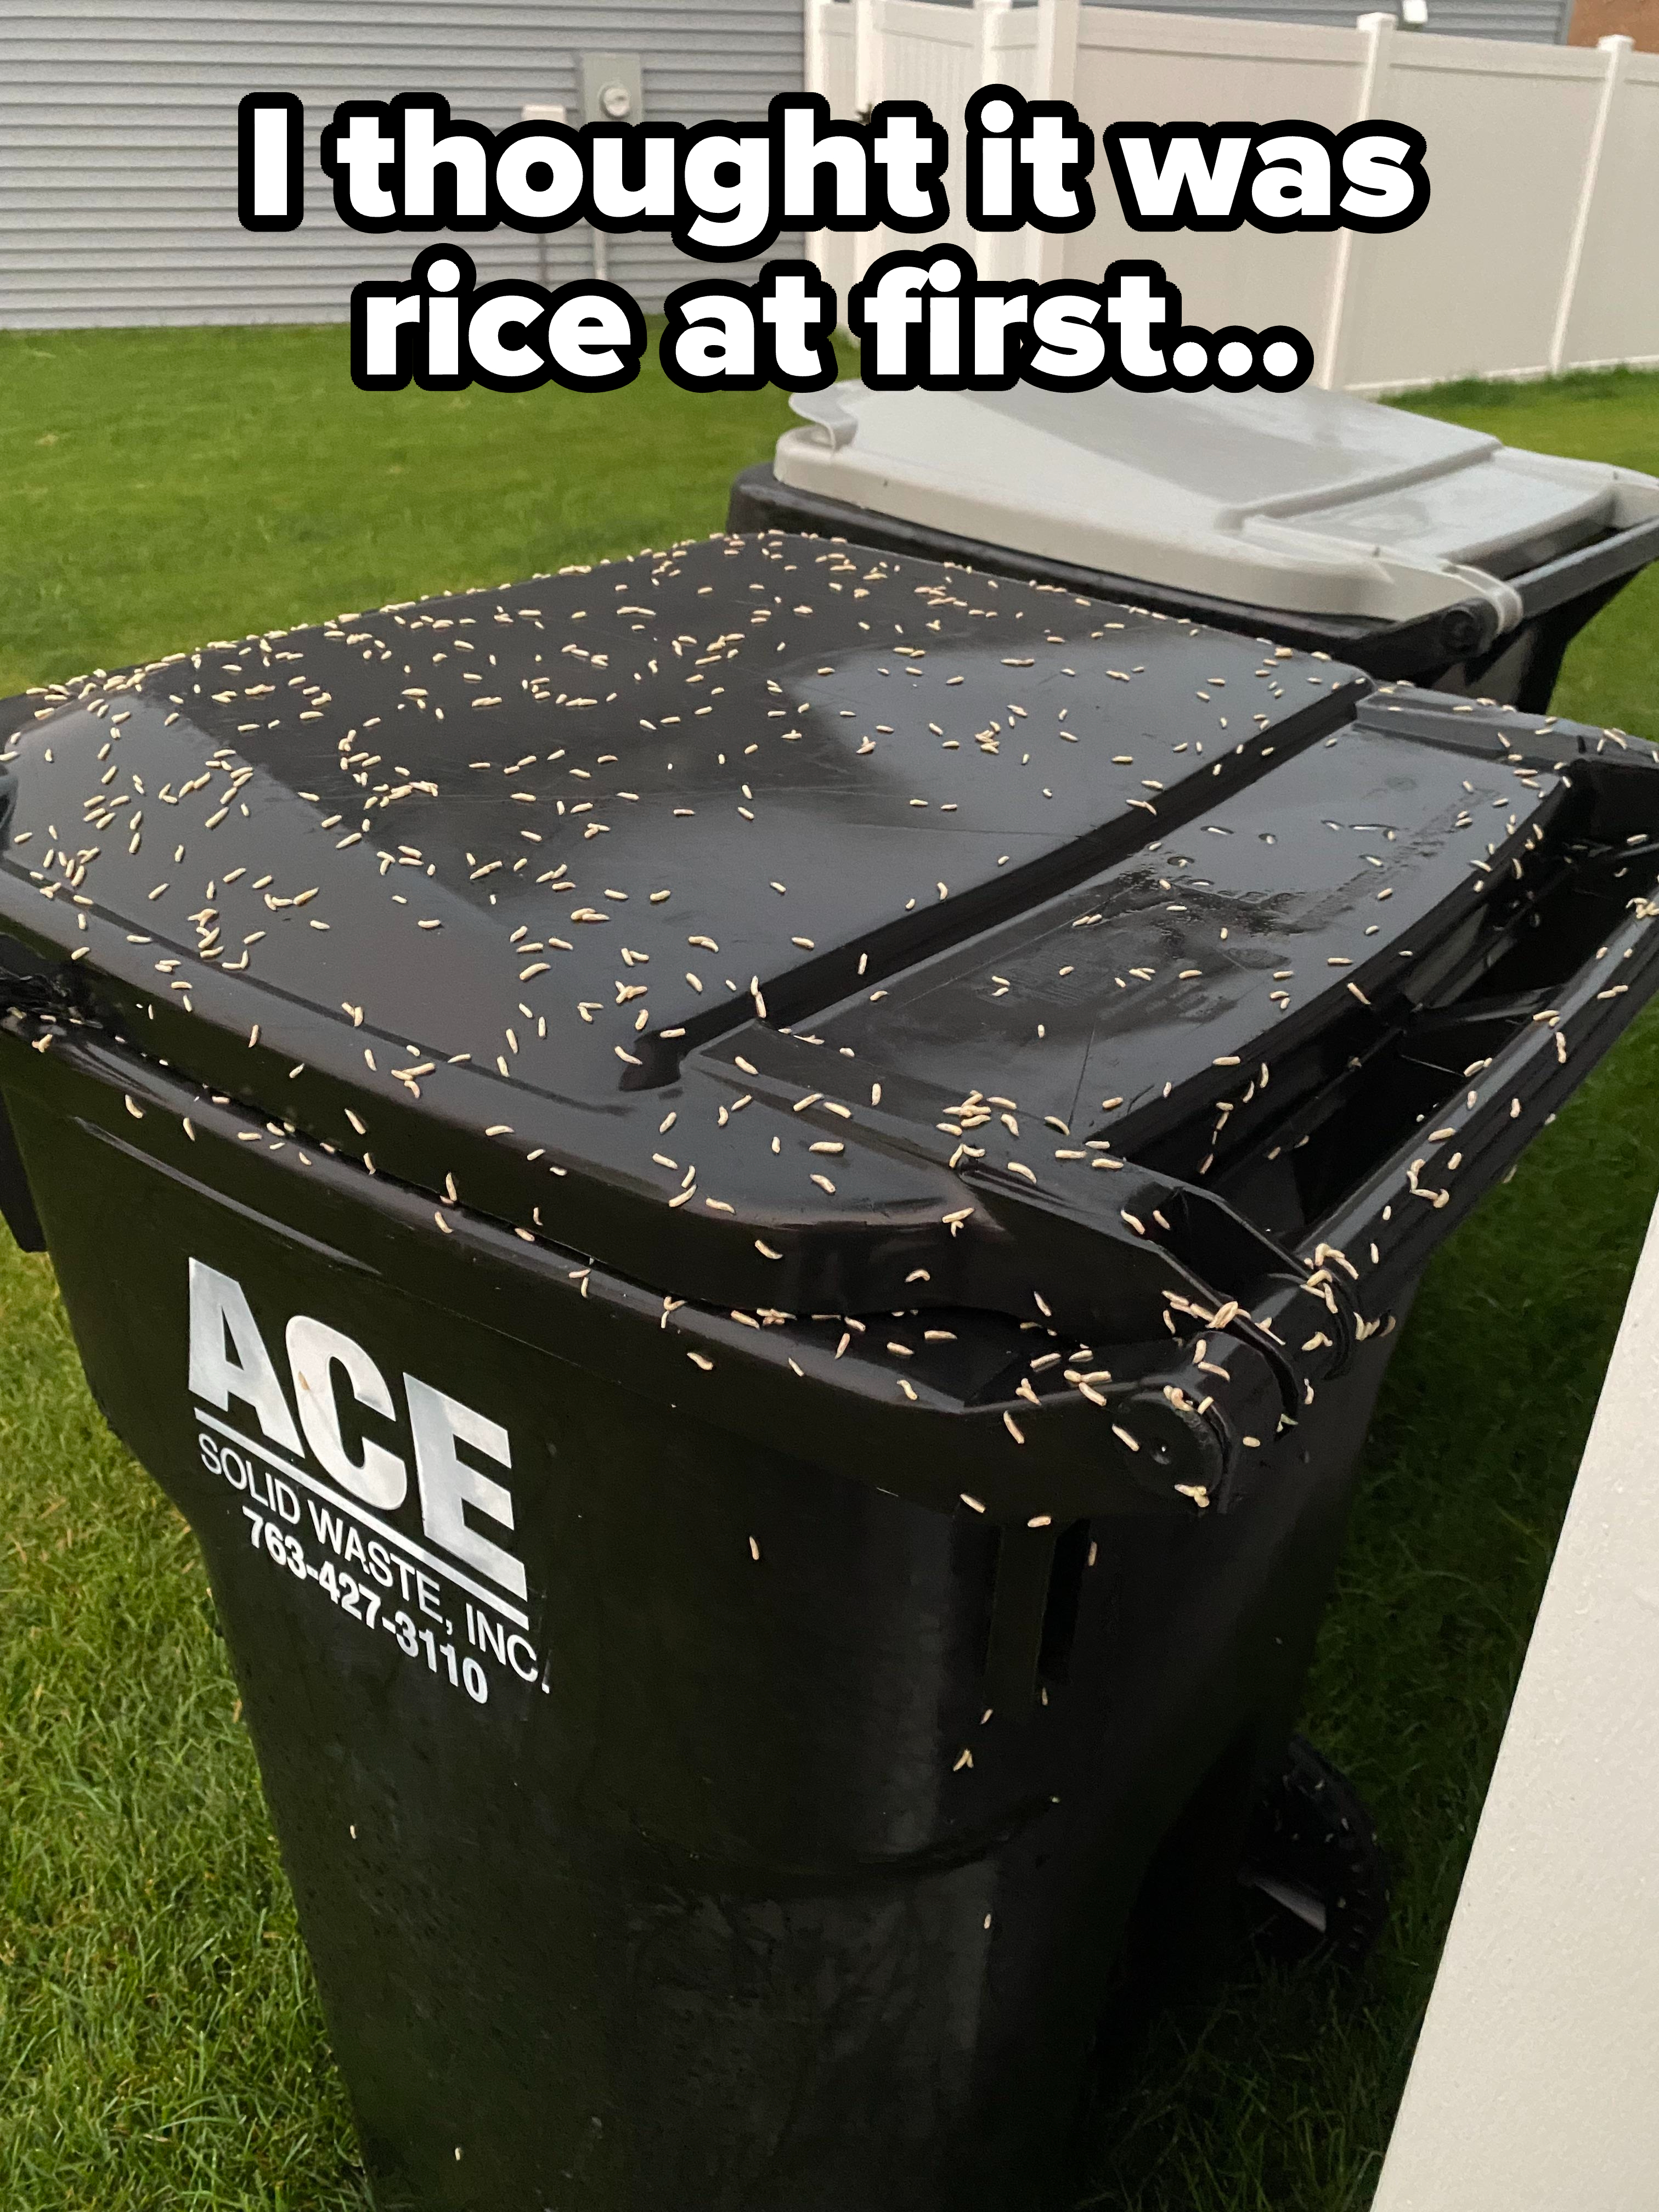 A large trash can on the grass with an infestation of what looks like small maggots all over the top, with the caption &quot;I thought it was rice at first&quot;